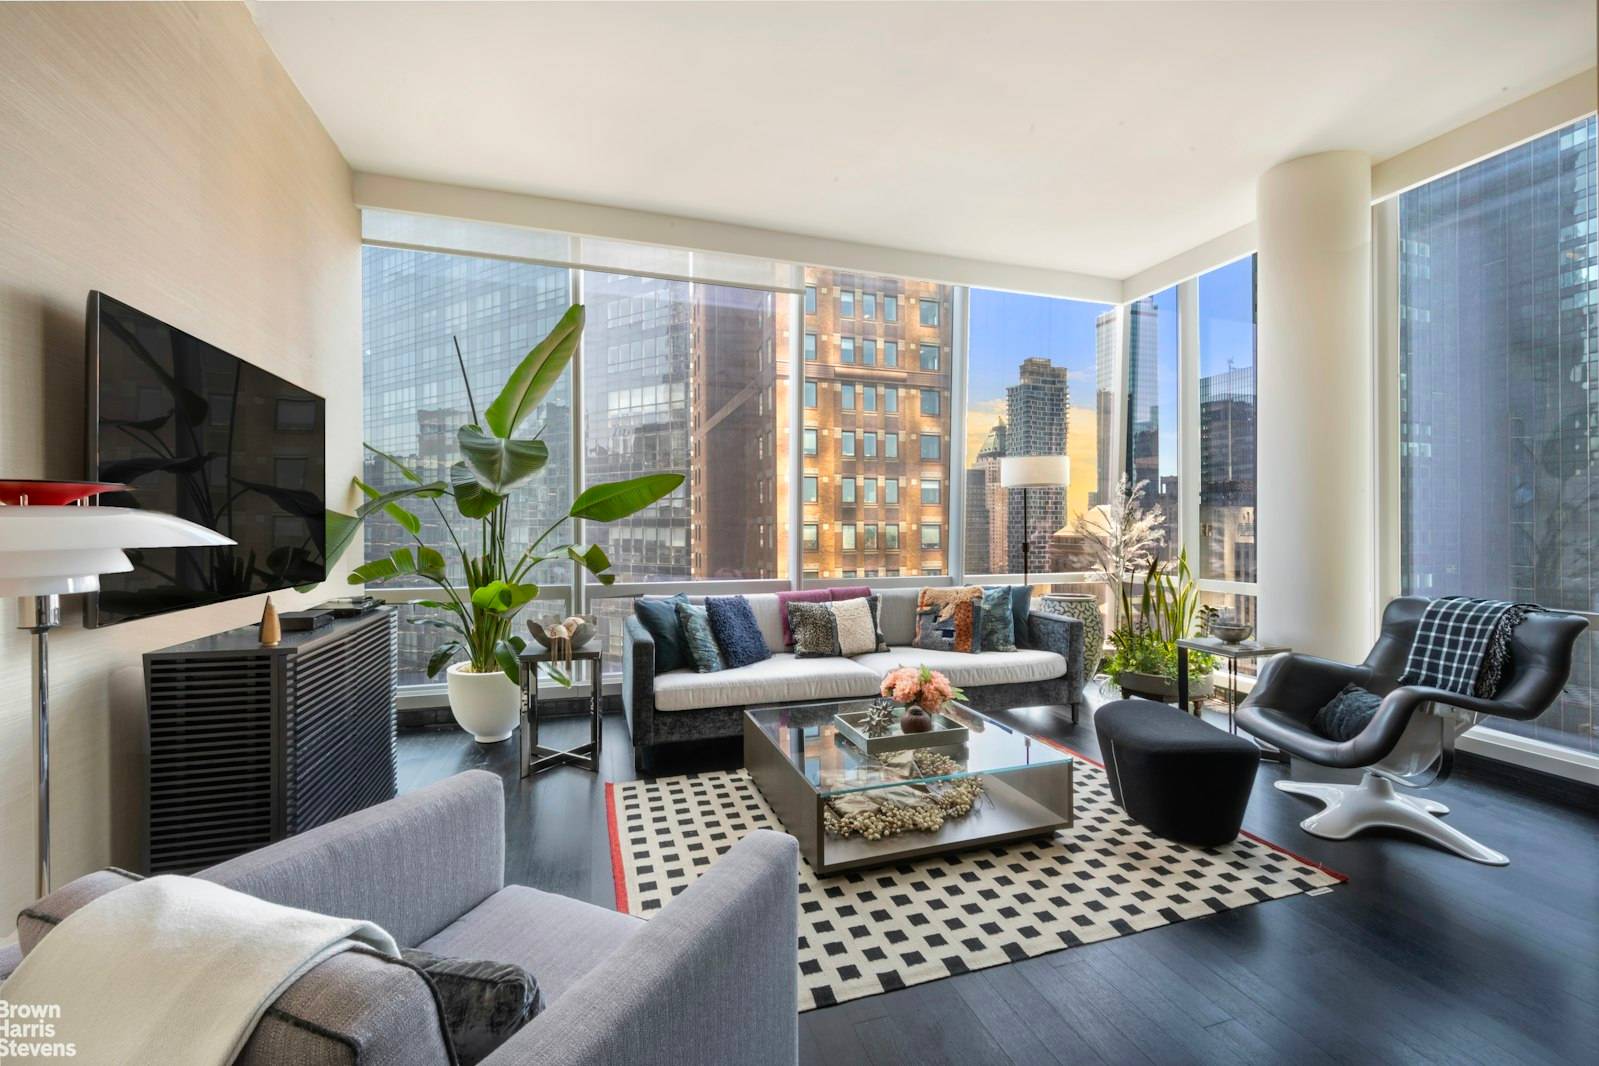 Welcome to One57 38EPerched above the prestigious 5 star Park Hyatt, this exceptional 1 Bedroom 2 Bath residence at One57 offers sweeping views of Midtown Manhattan.